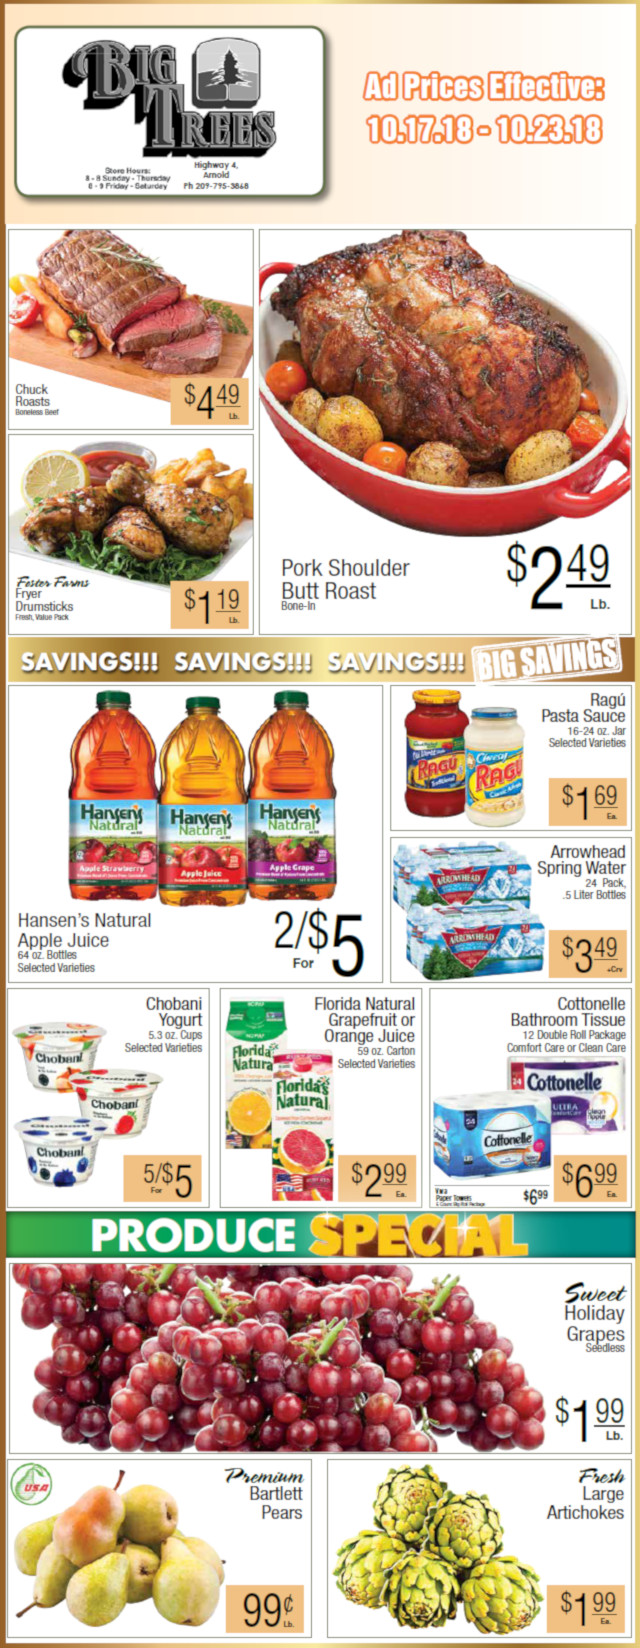 Big Trees Market Weekly Ad & Grocery Specials Through October 23rd